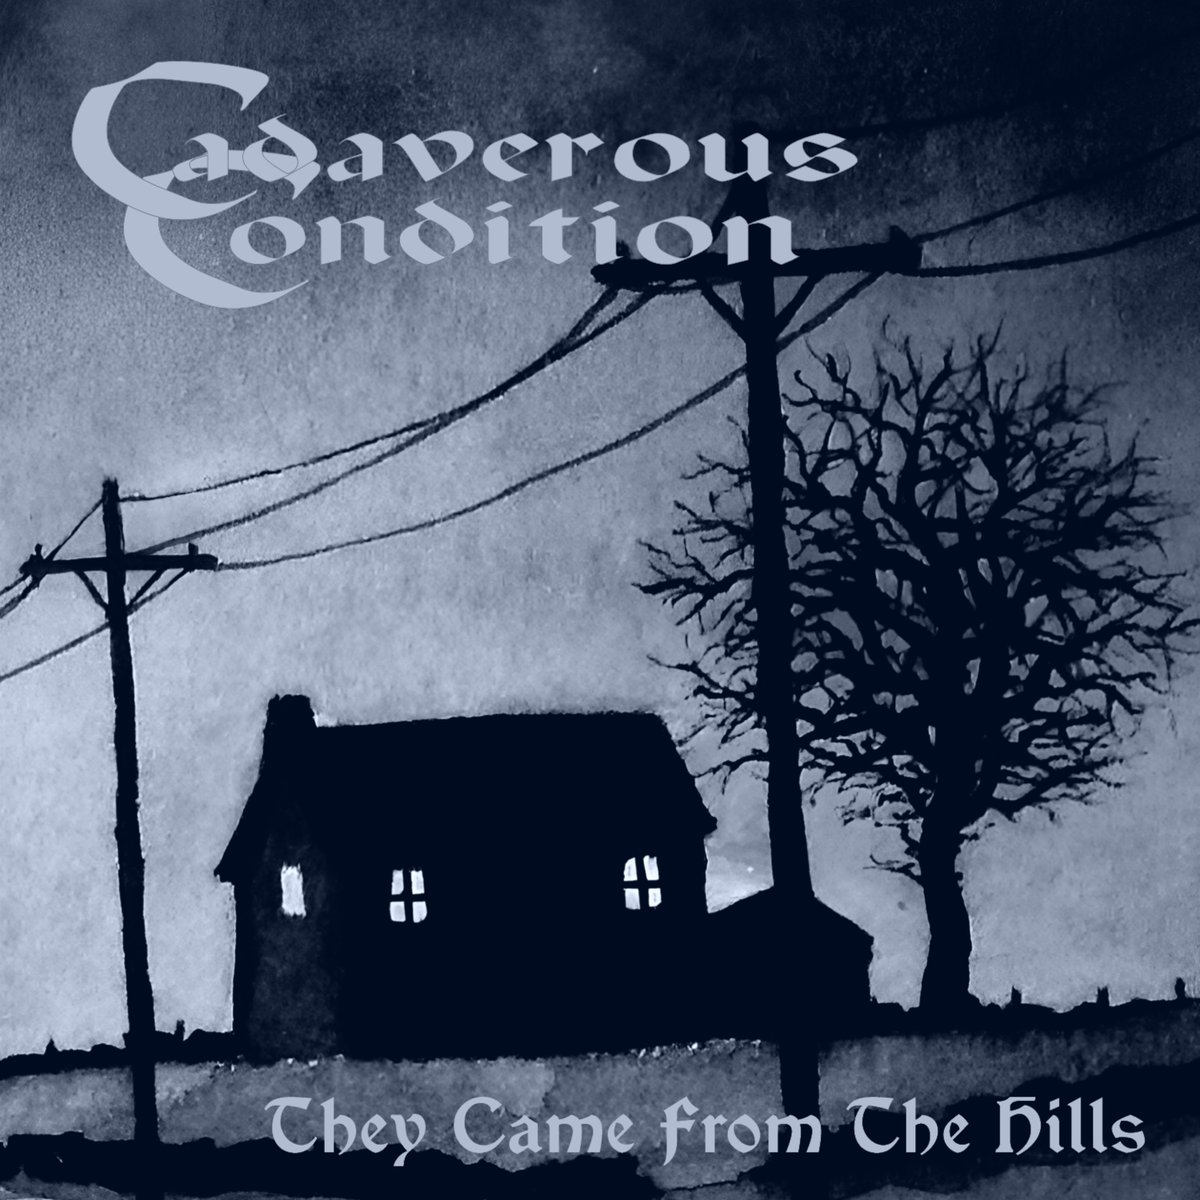 Cadaverous Condition unleash new single “They Came From The Hills” Pre-order upcoming album 'Never Arrive, Never Return' now via The Circle Music! Press release: mailchi.mp/3-nation.com/c…